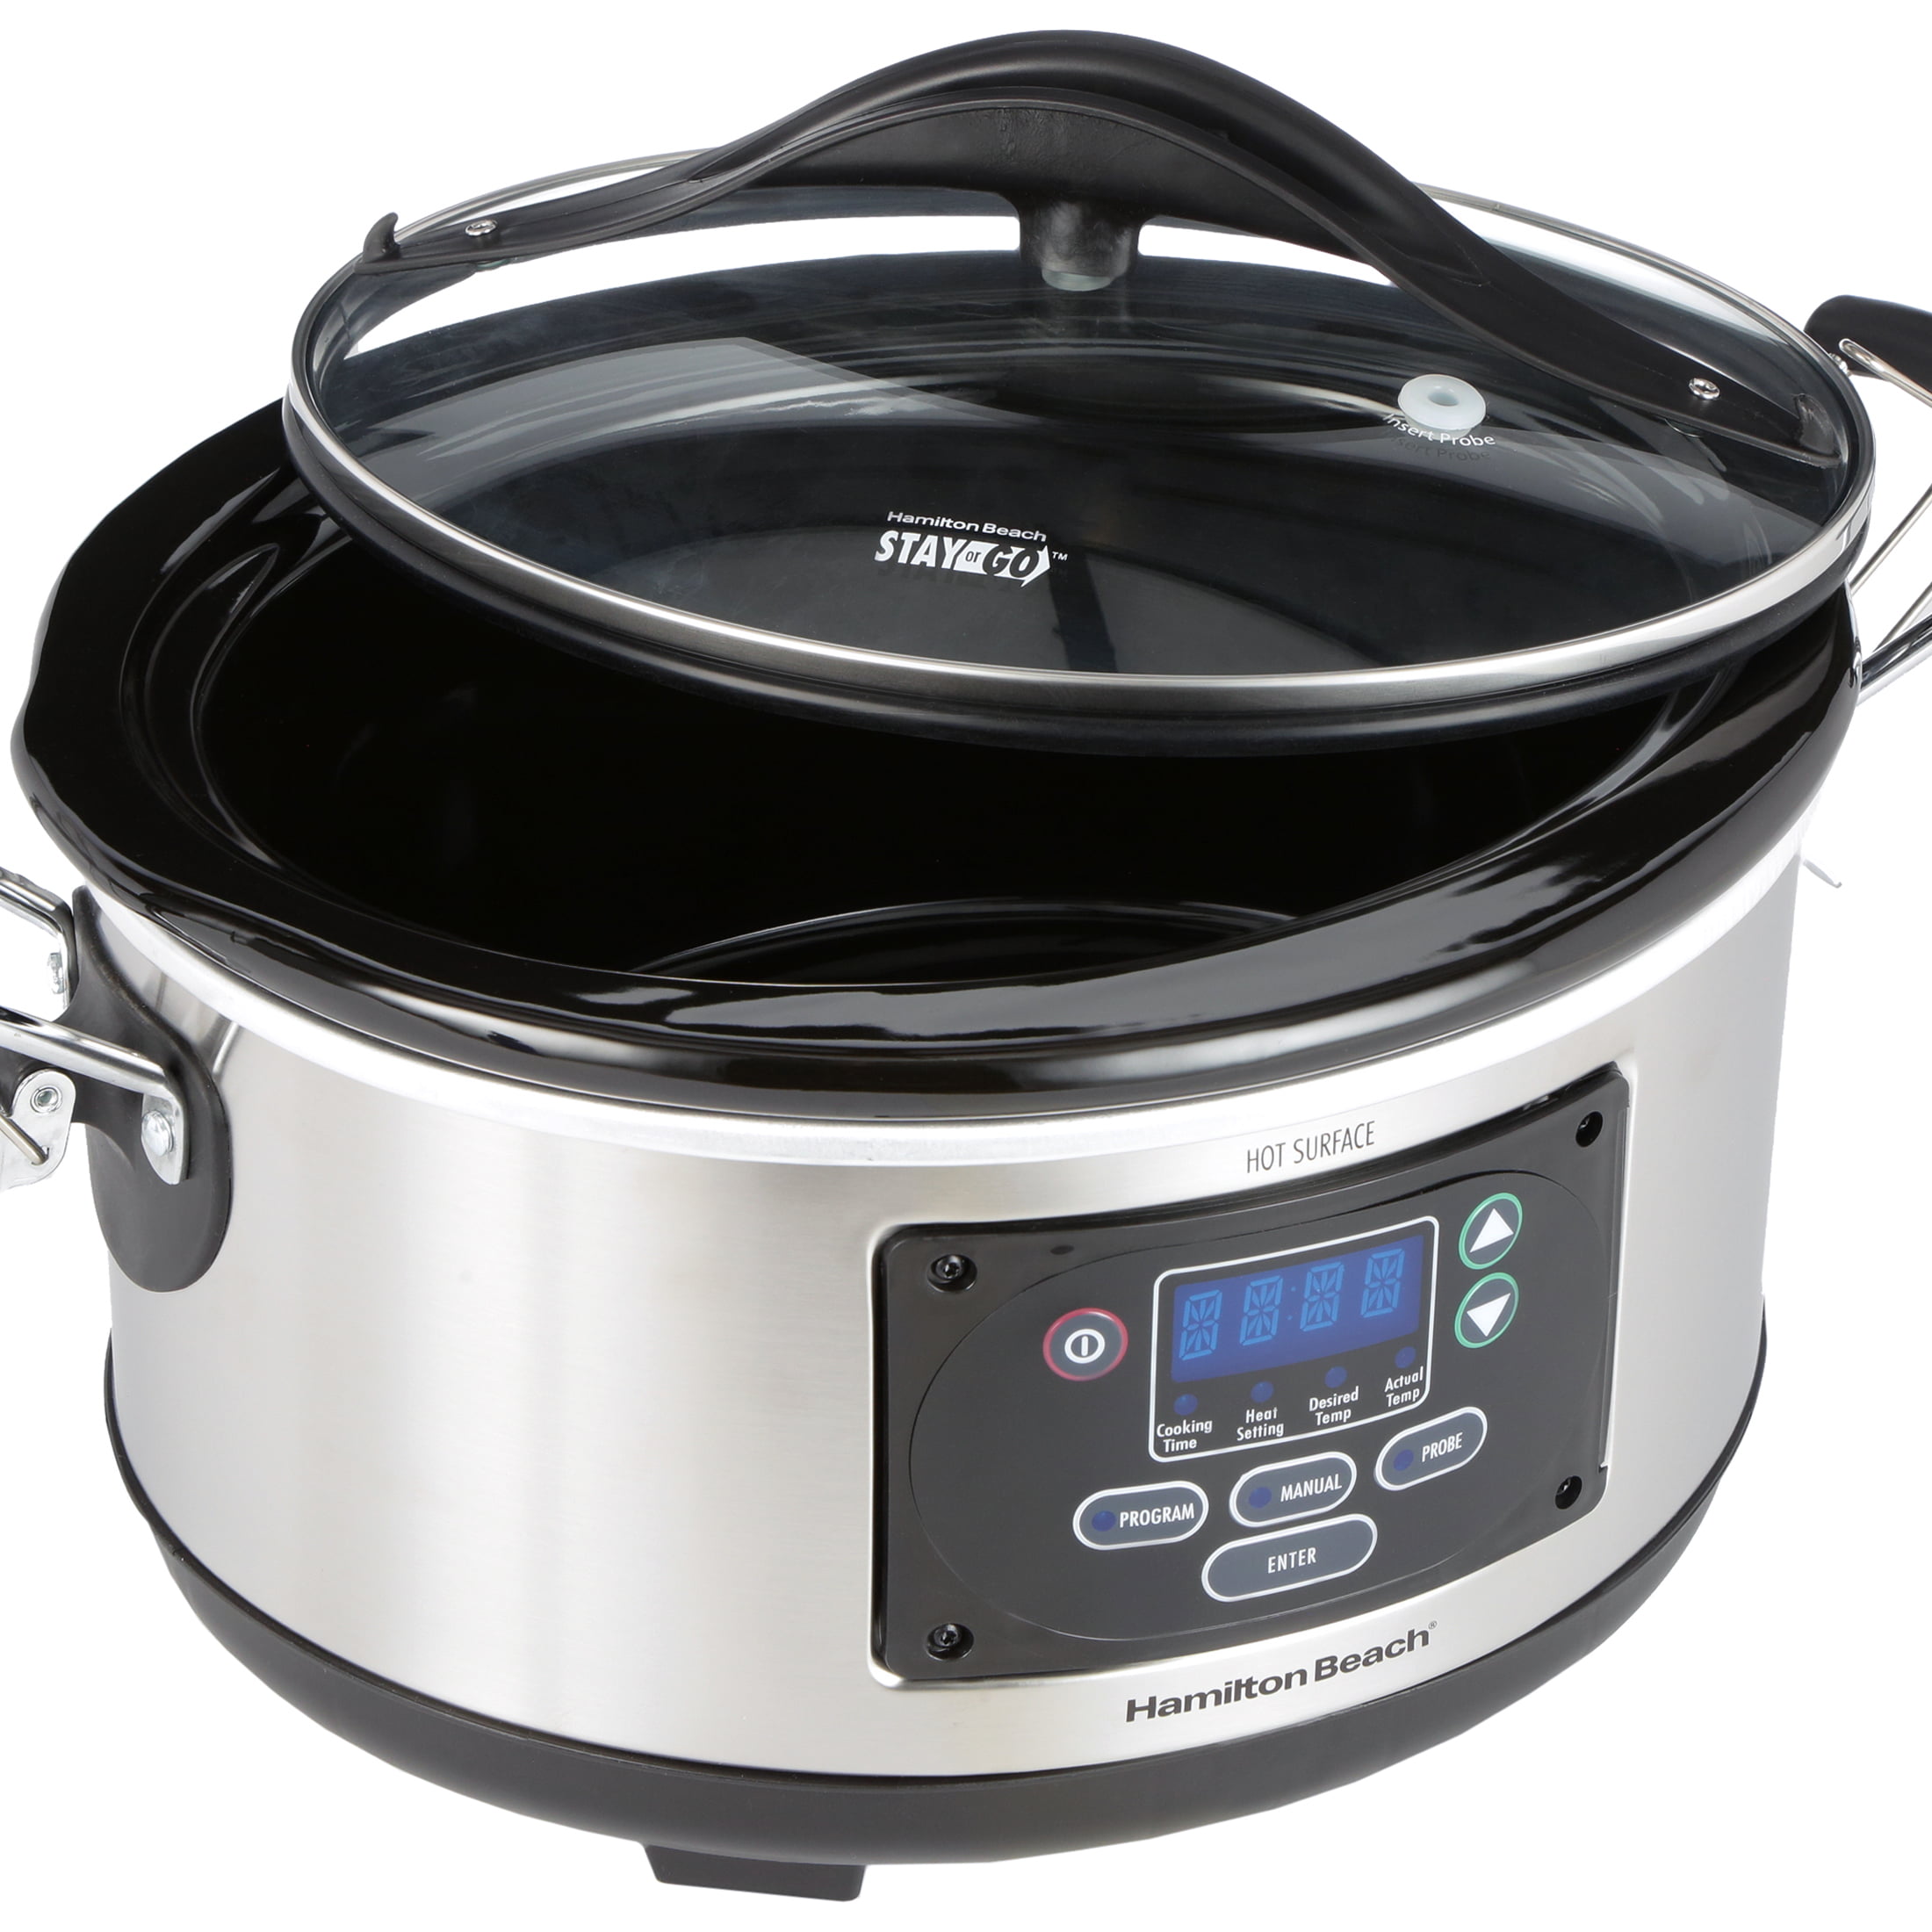  Hamilton Beach (33967A) Slow Cooker With Temperature